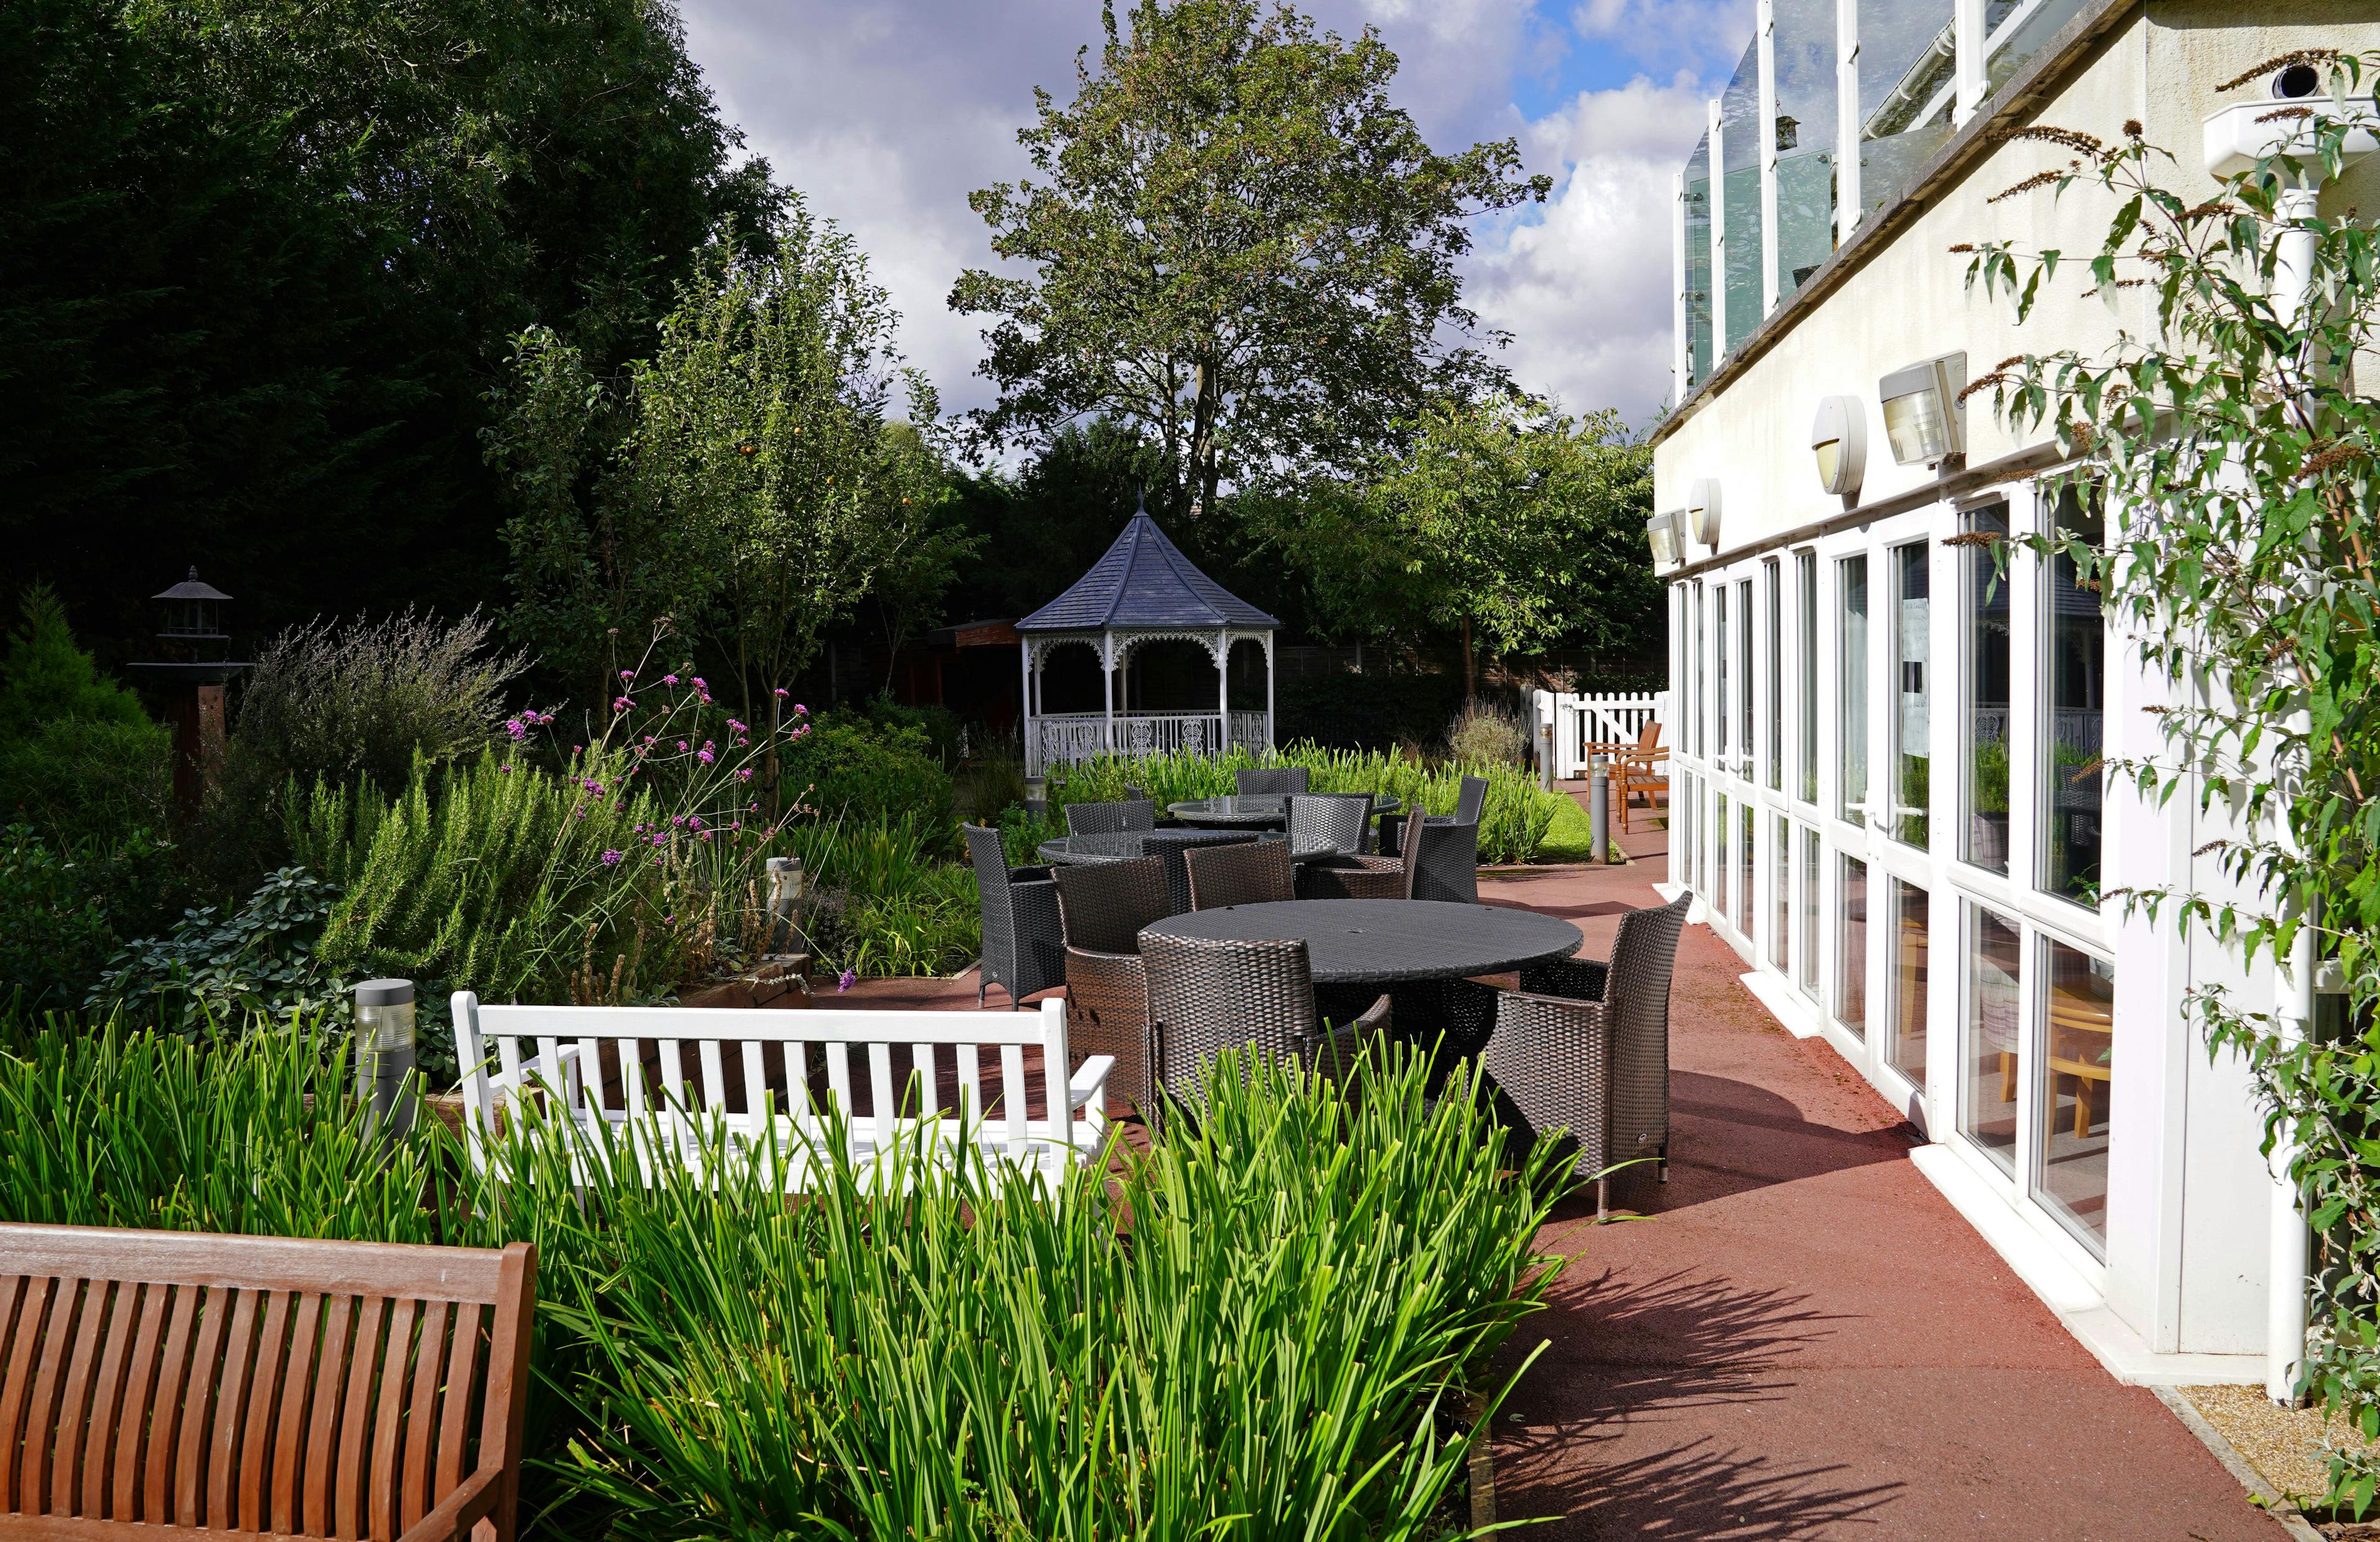 Garden of Haven care home in Pinner, London